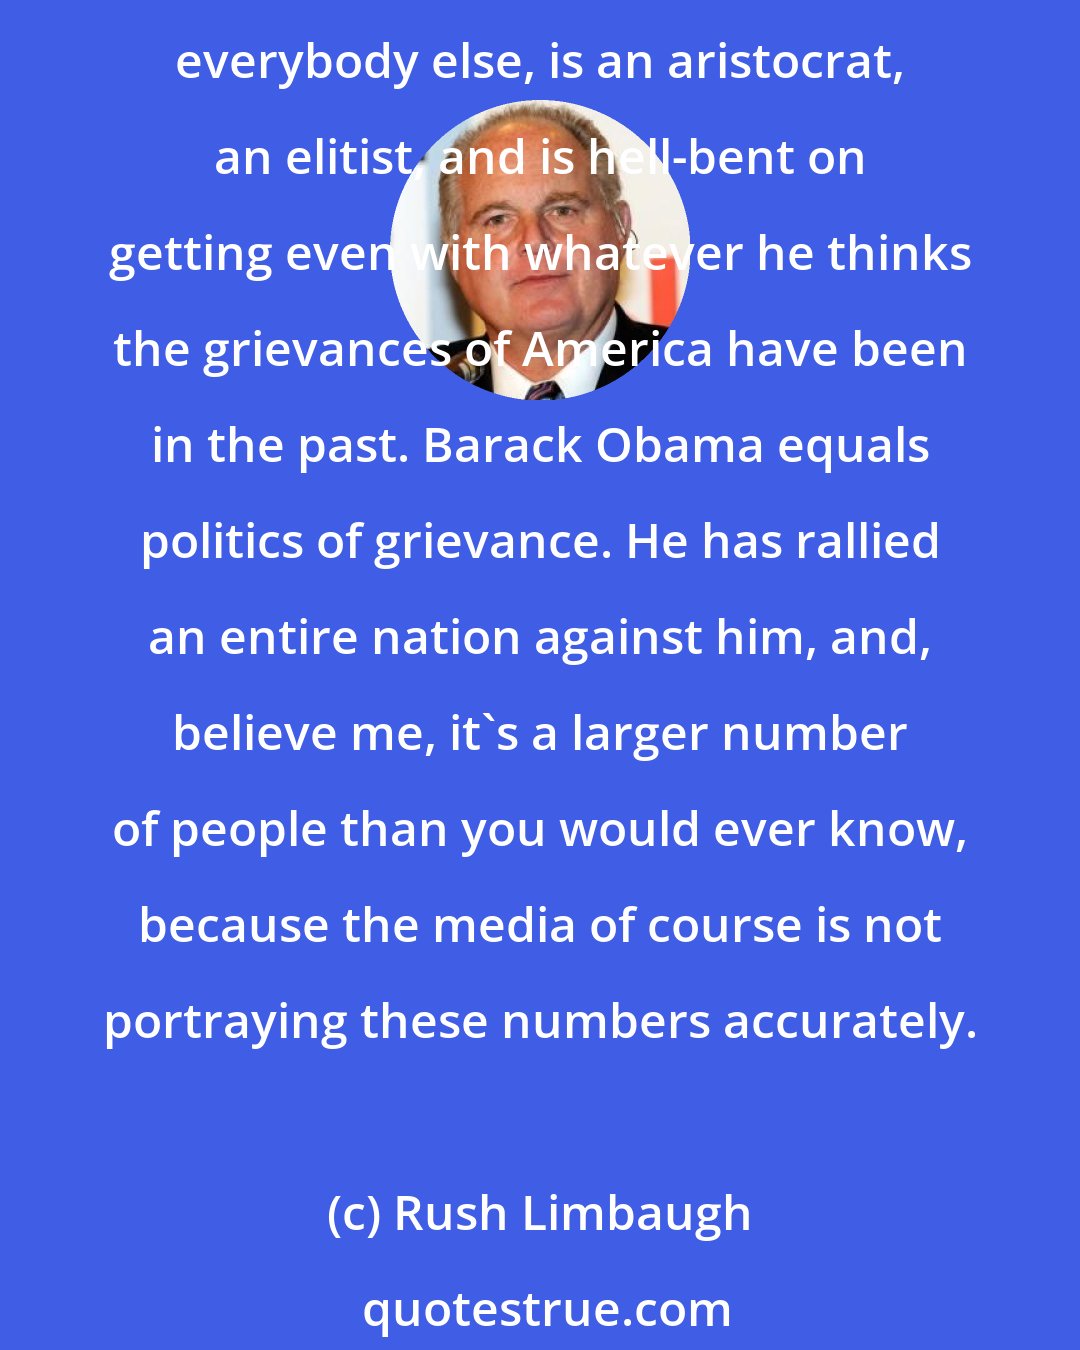 Rush Limbaugh: We've elected an untested prima donna, zero, zilch, nada experience, and it's coming home to roost, clear for one and all to see, and the guy thinks he's better and smarter than everybody else, is an aristocrat, an elitist, and is hell-bent on getting even with whatever he thinks the grievances of America have been in the past. Barack Obama equals politics of grievance. He has rallied an entire nation against him, and, believe me, it's a larger number of people than you would ever know, because the media of course is not portraying these numbers accurately.